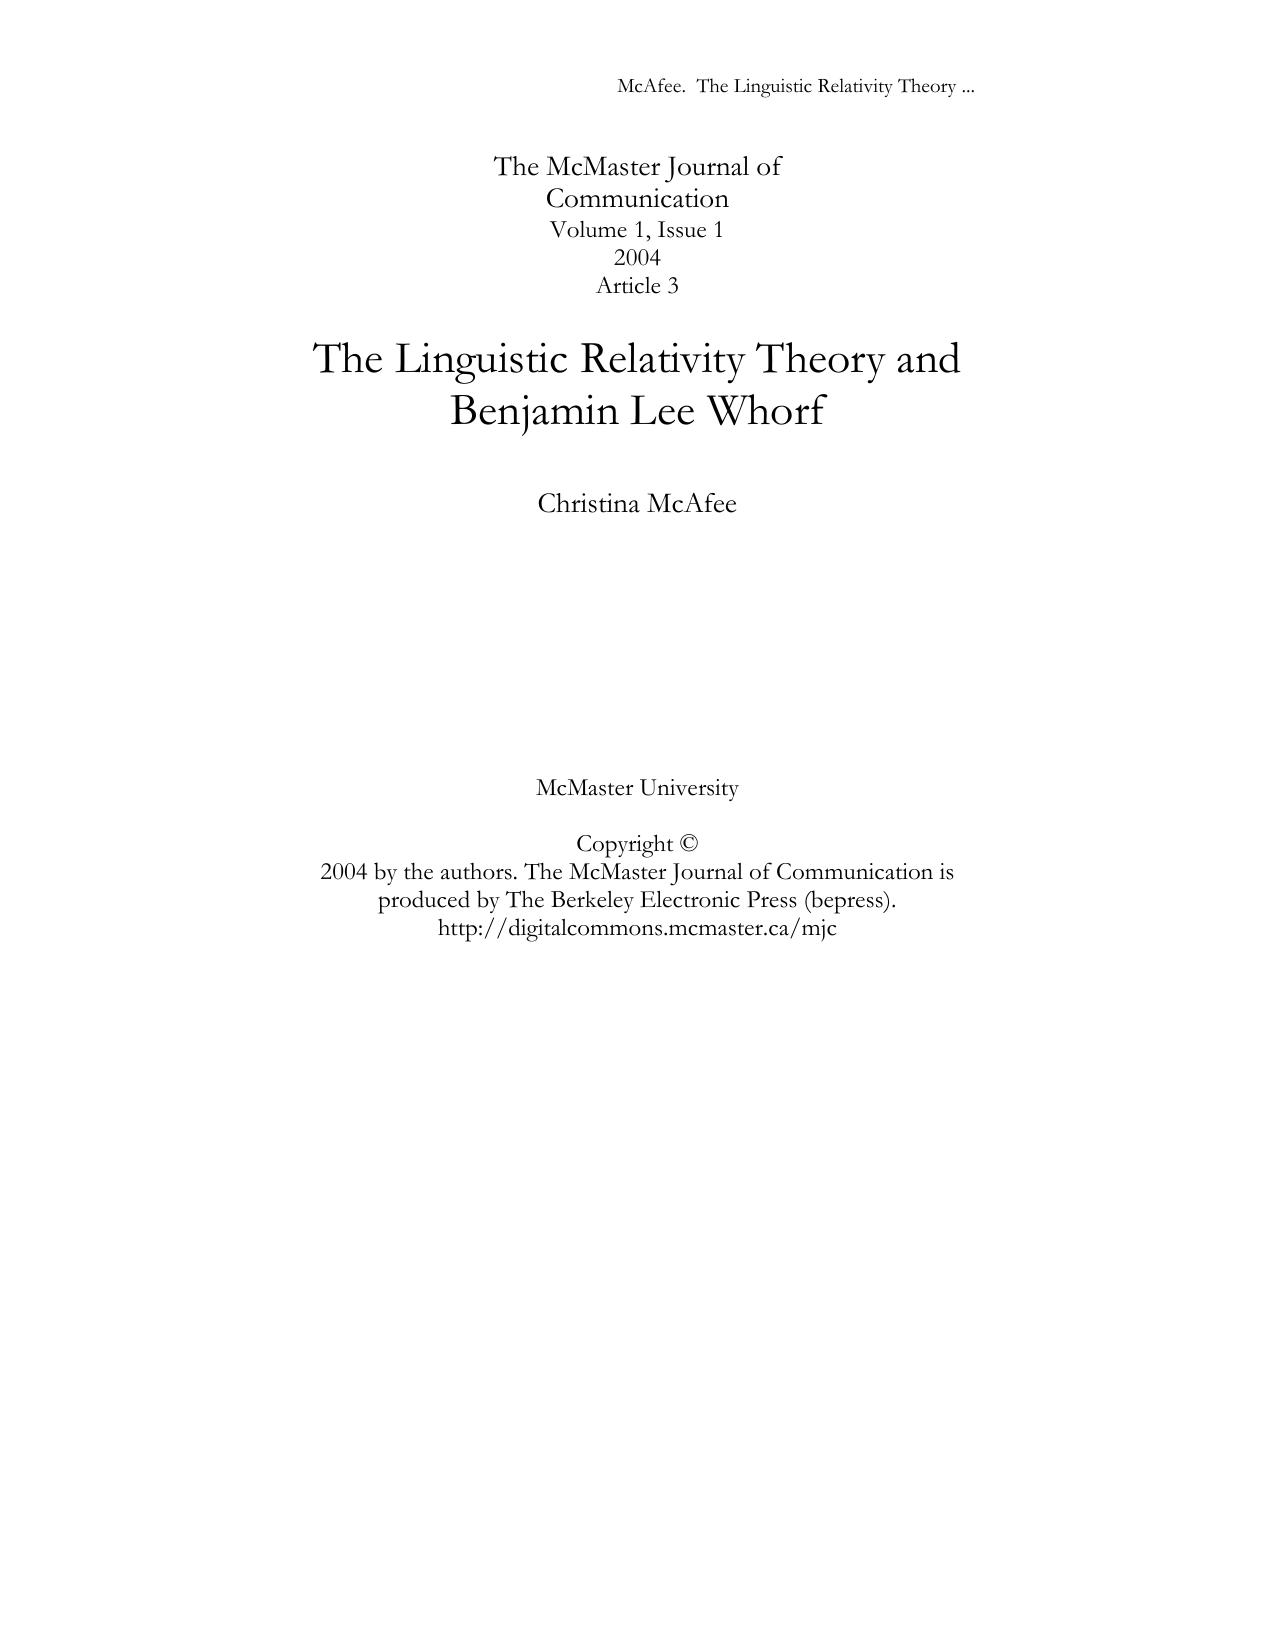 The Linguistic Relativity Theory and Benjamin Lee Whorf - Essay